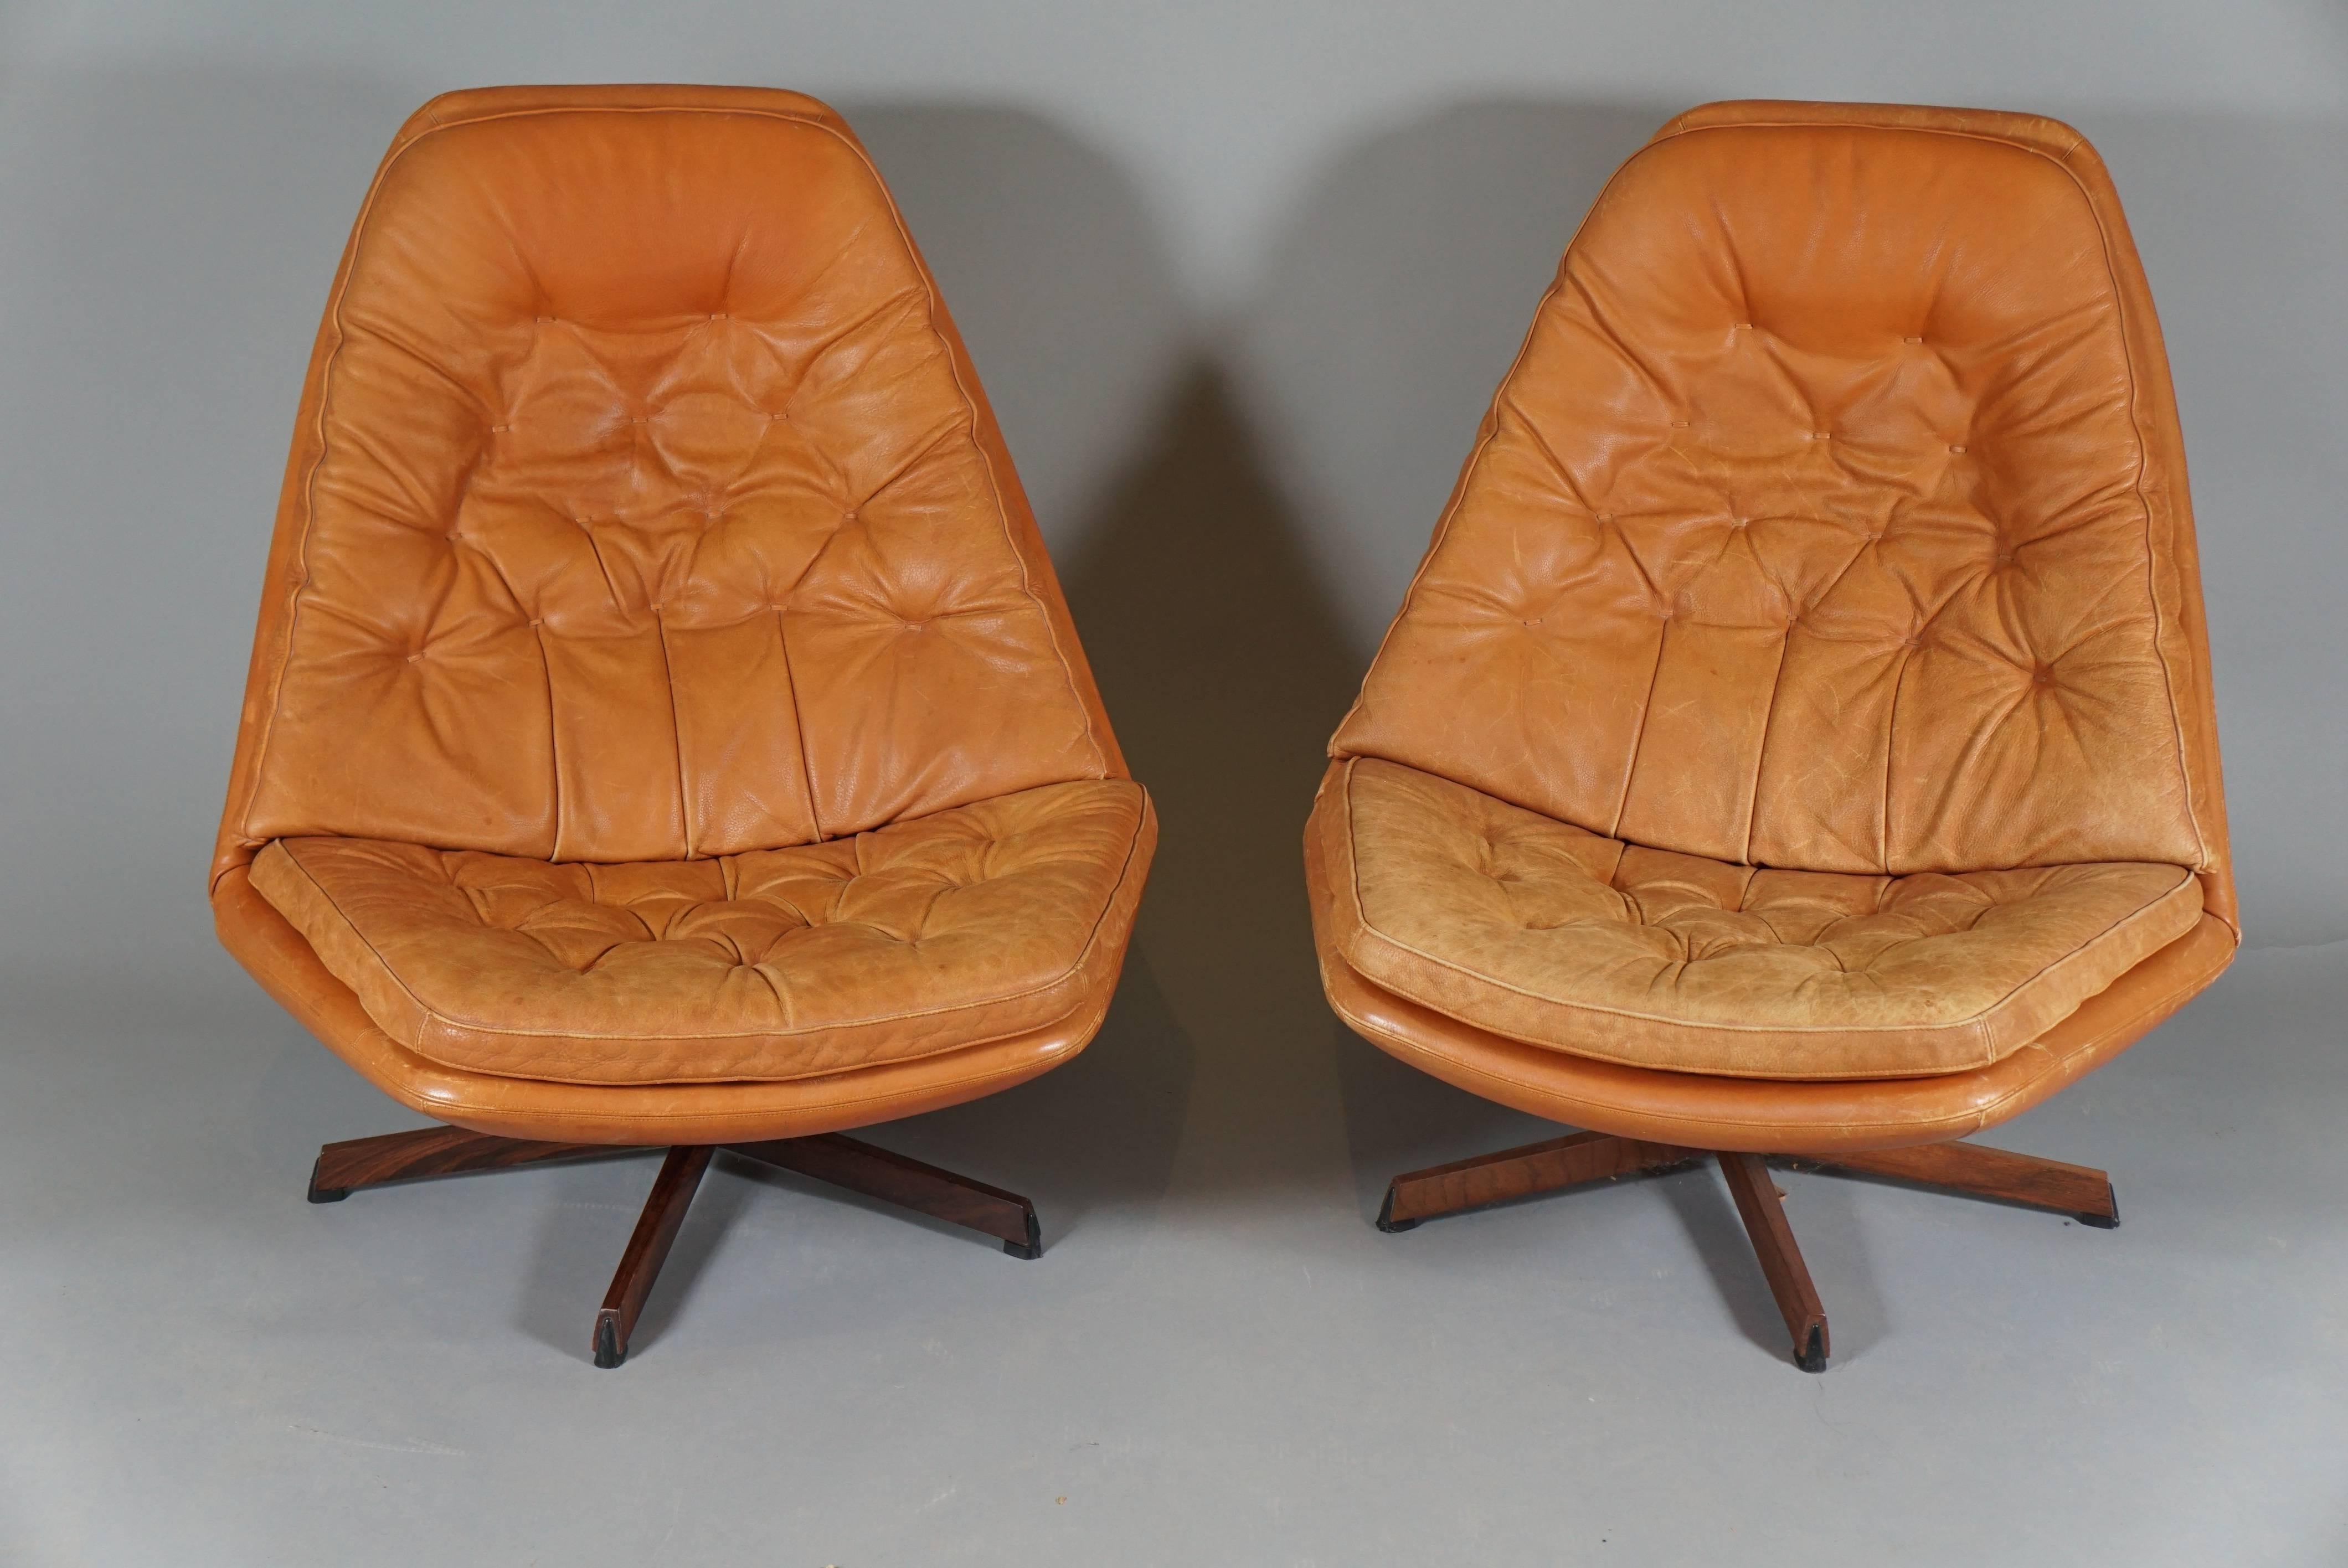 Pair of leather swivel chairs with rosewood bases by Danish designers Madsen & Schubell, circa 1960s. Ottomans are 17